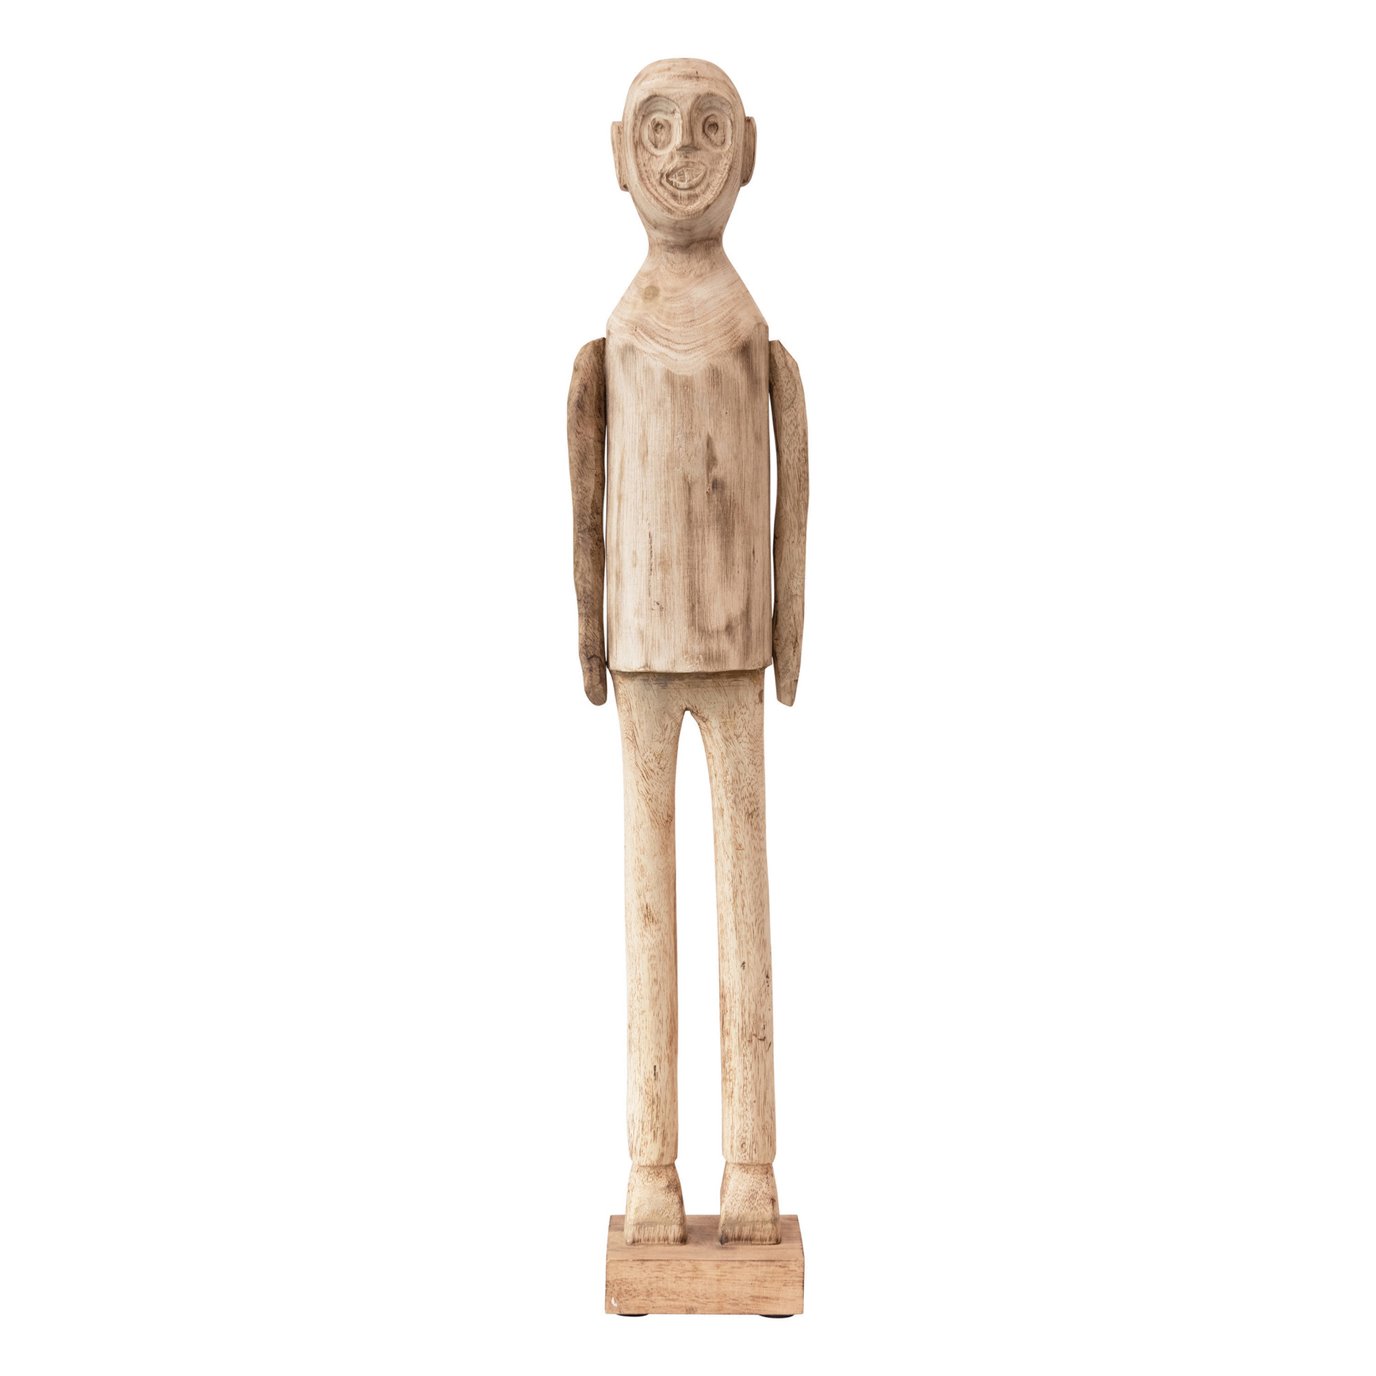 Hand-Carved Mango Wood Standing Figure (Each One Will Vary)